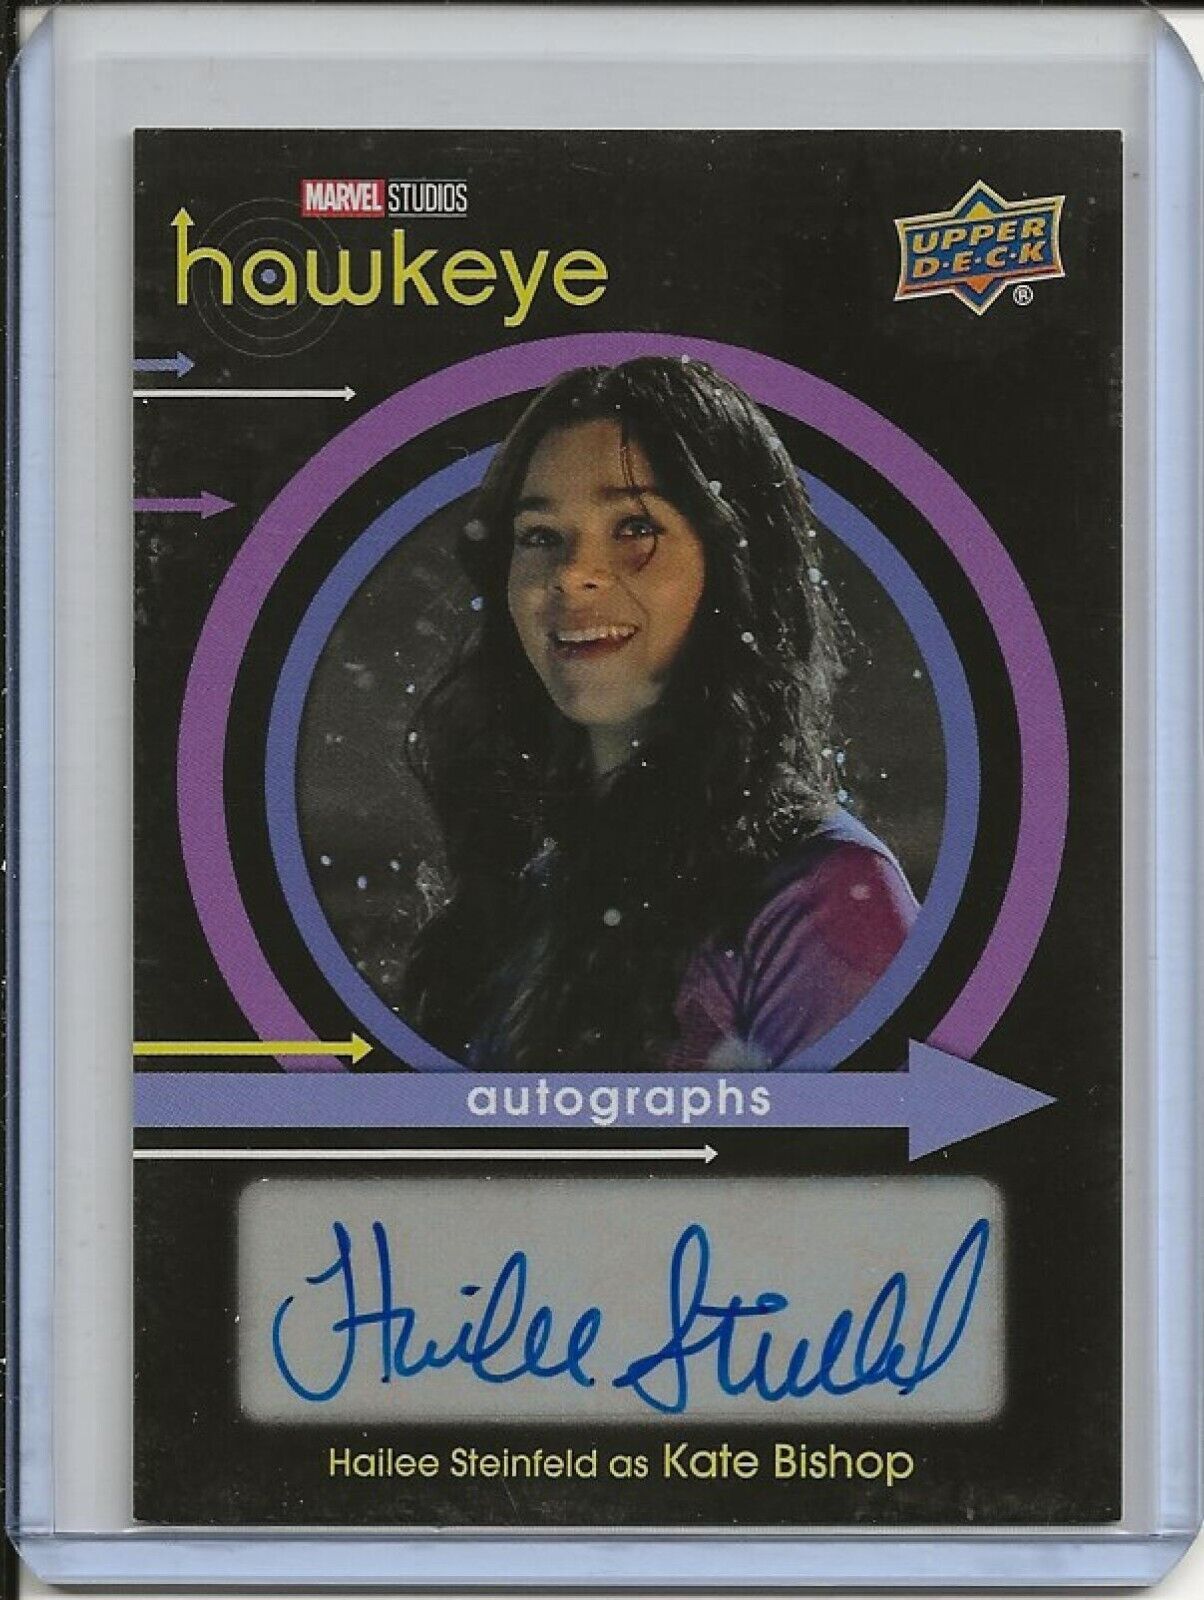 2023 UD Marvel Hawkeye Autograph Auto Hailee Steinfeld as Kate Bishop A-HS